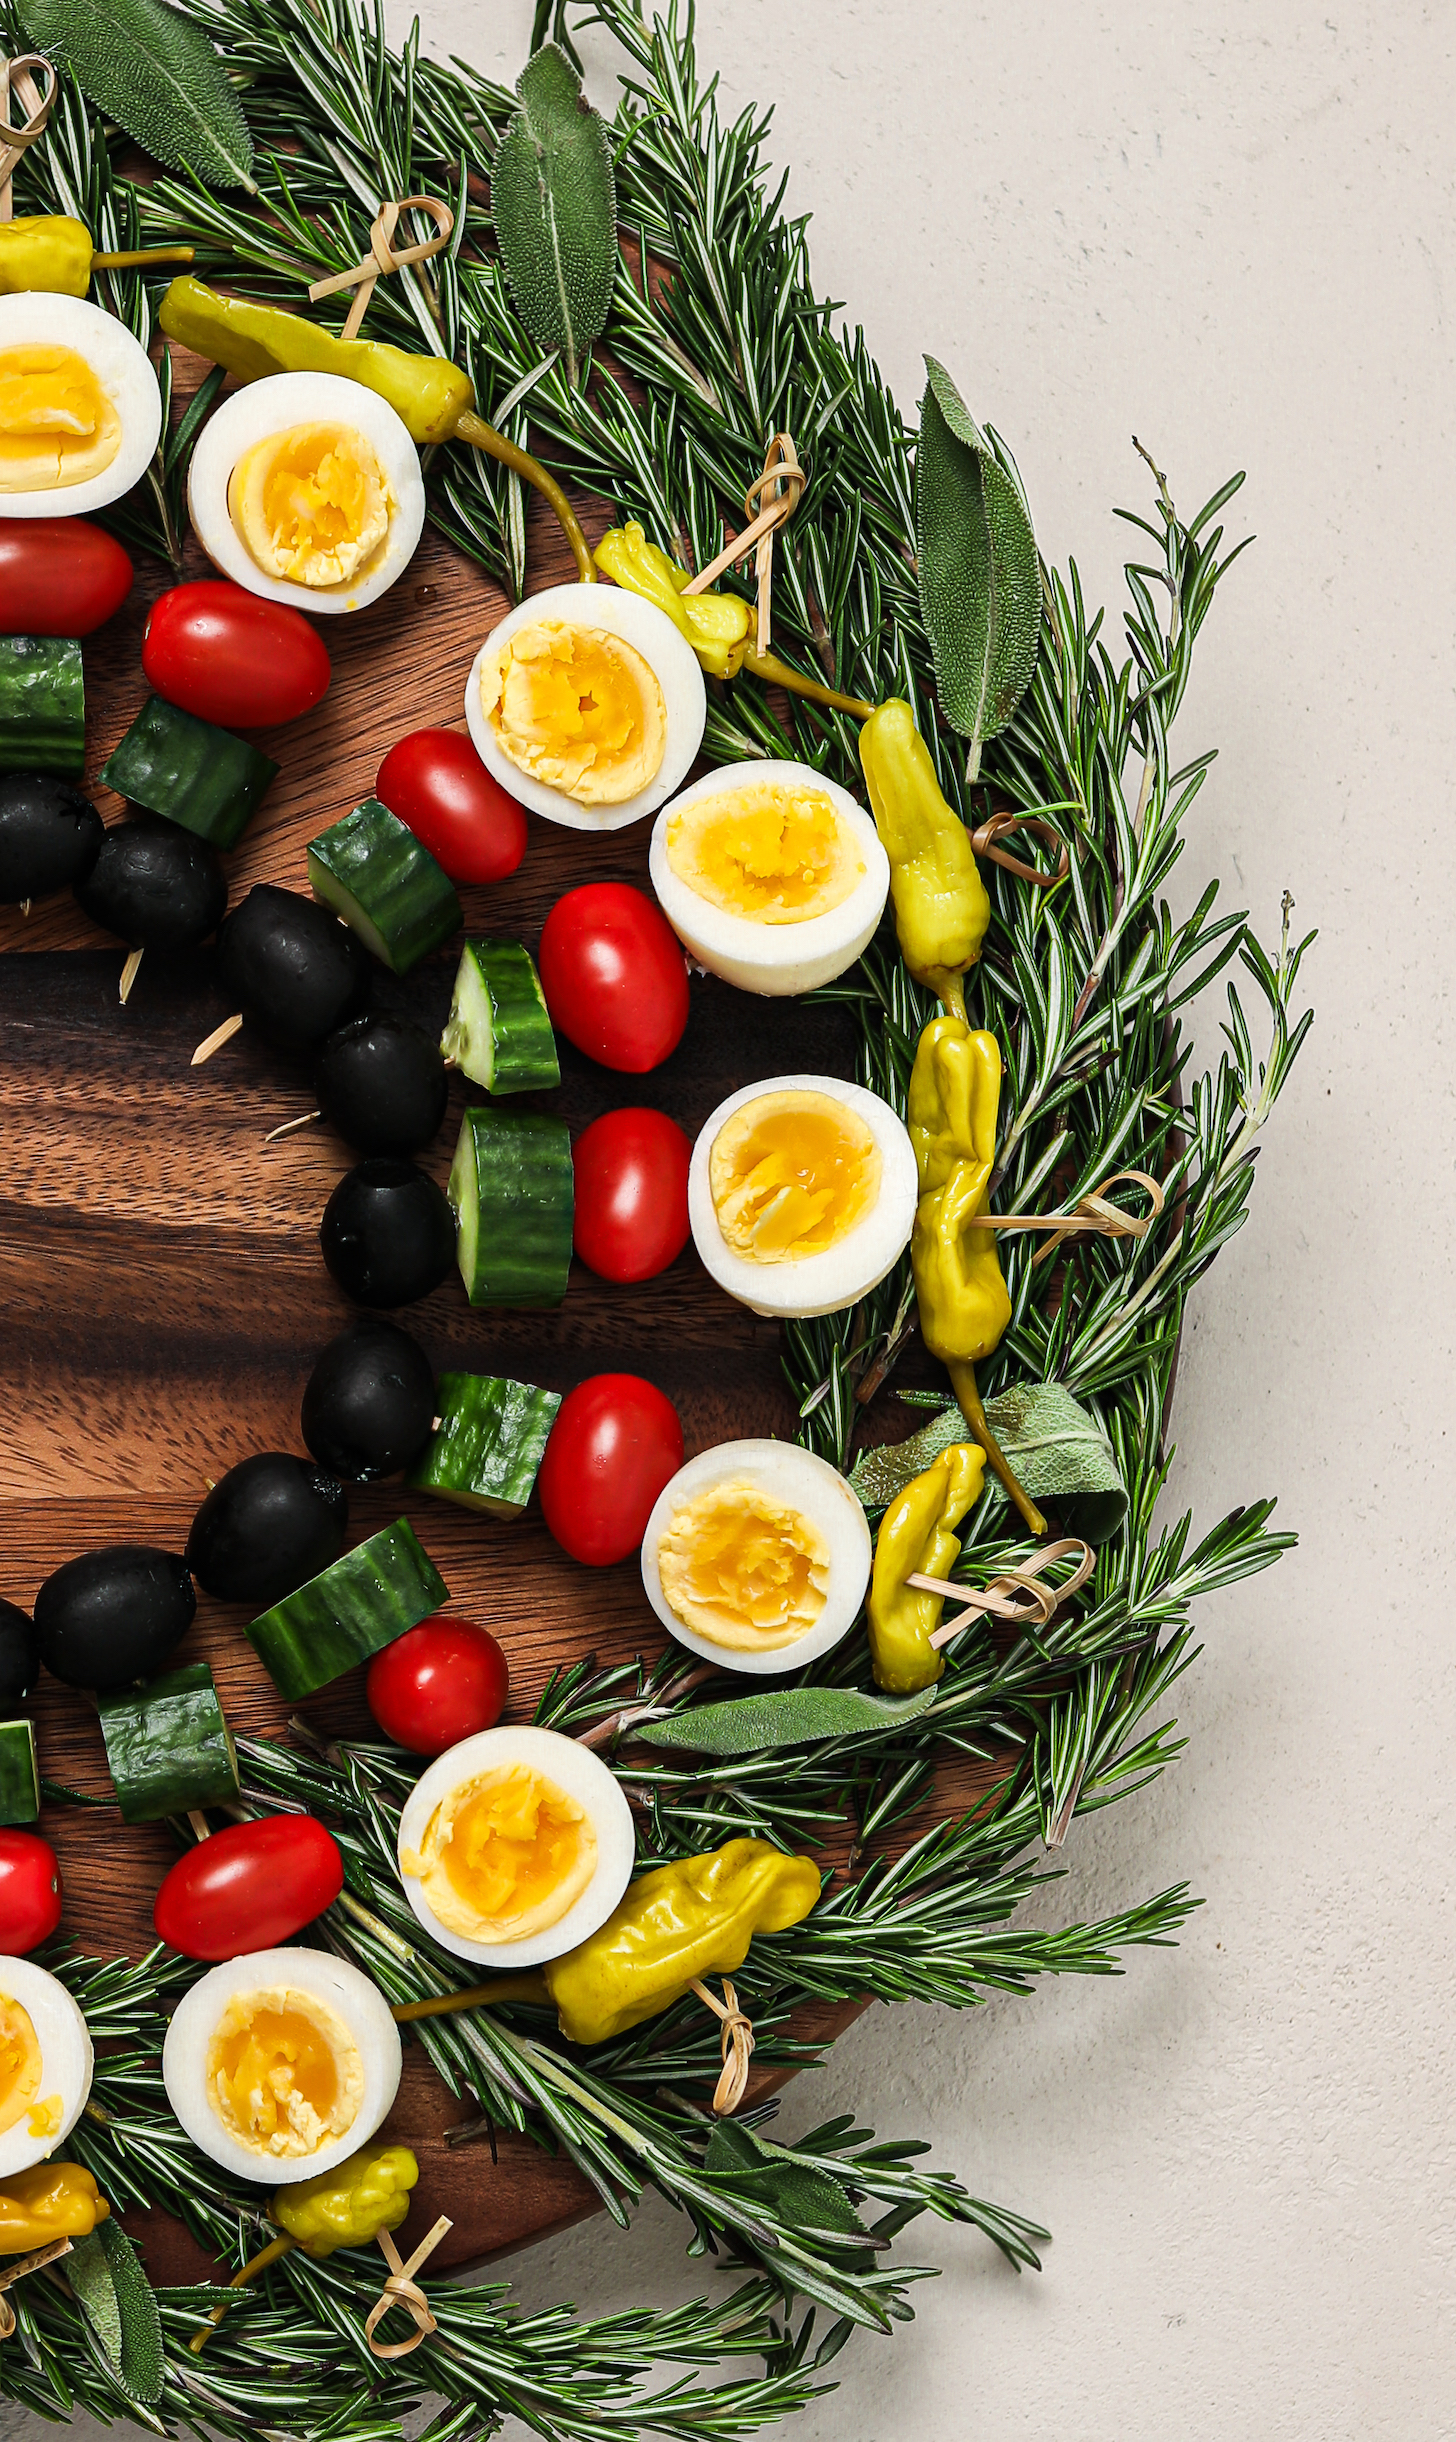 Overhead image of half a colourful and festive wreath of wooden picks threaded with boil egg halves, veggies and chilli peppers on a bed of rosemary and sage.